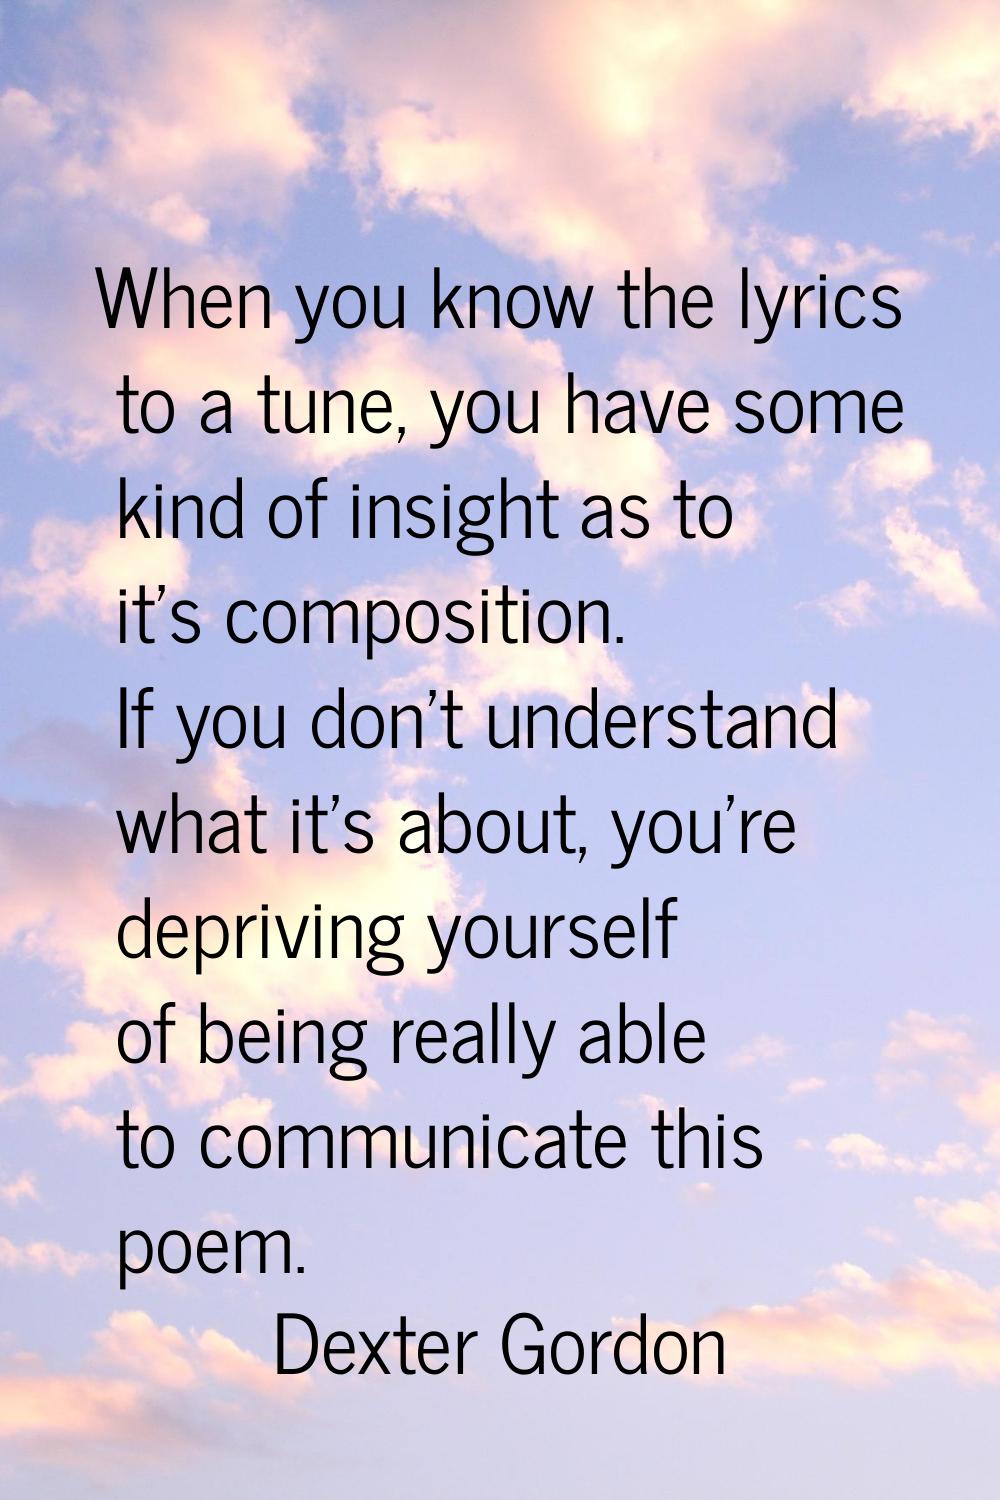 When you know the lyrics to a tune, you have some kind of insight as to it's composition. If you do